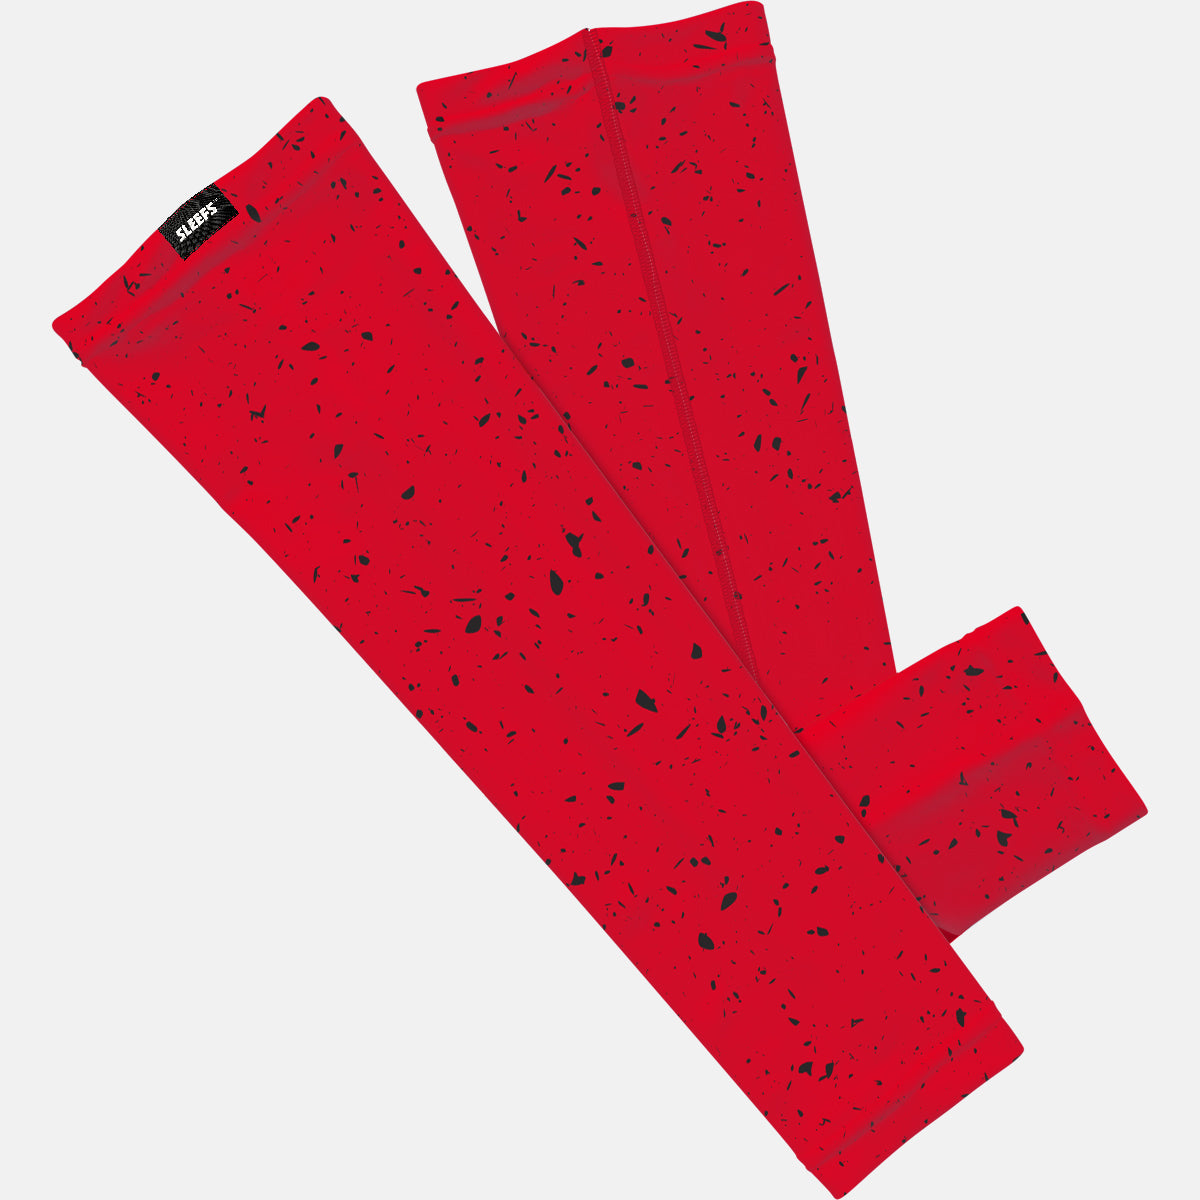 Concrete Red Arm Sleeve